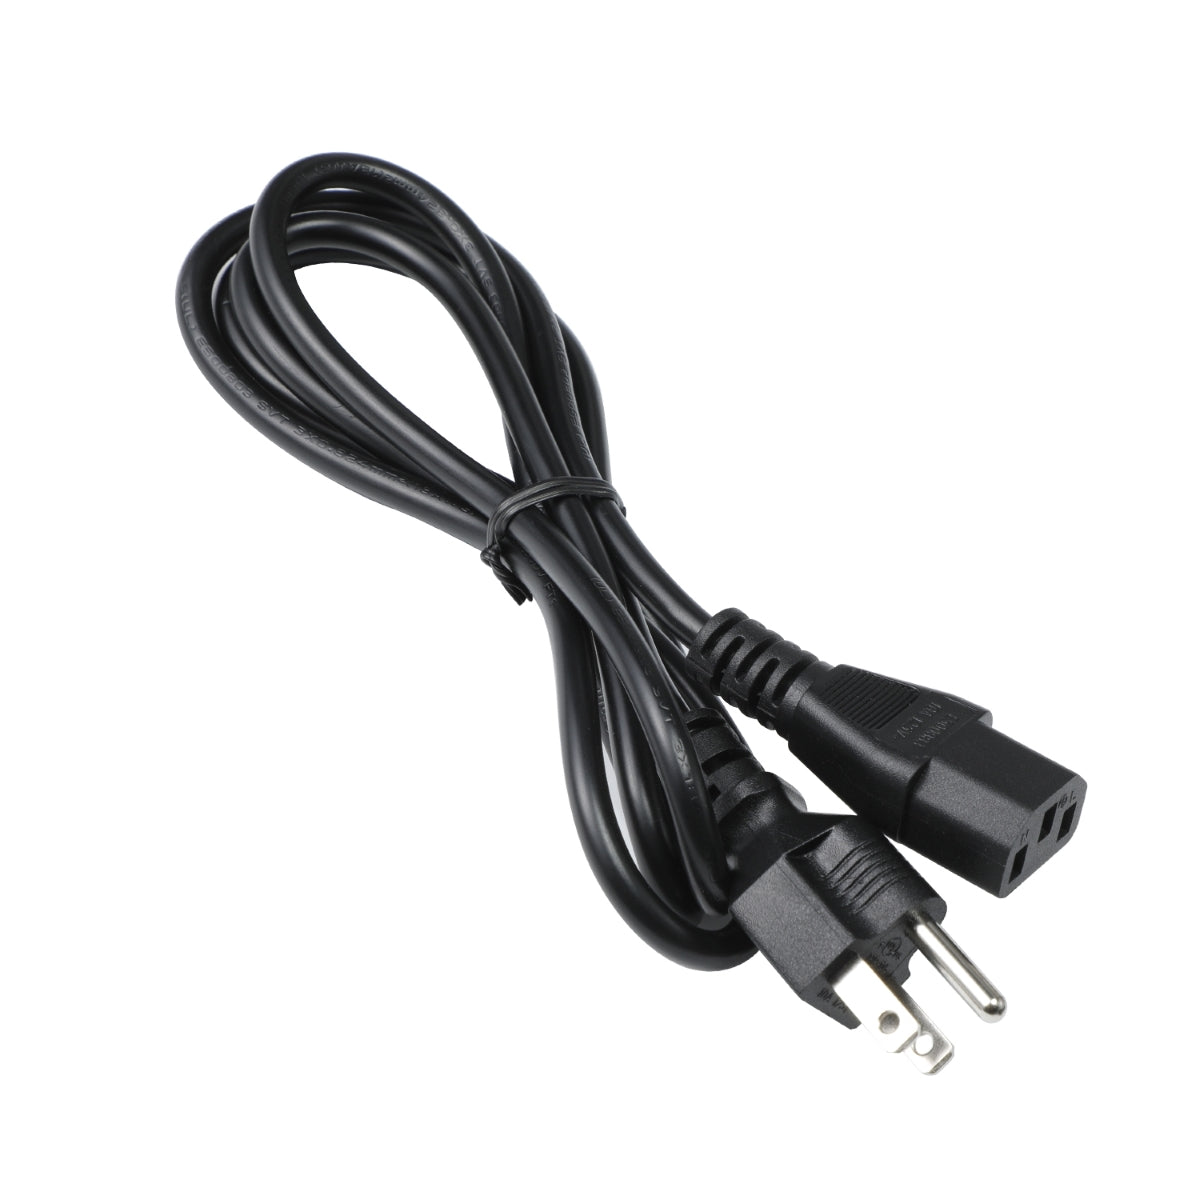 Power Cord for Dell P2418D Monitor.